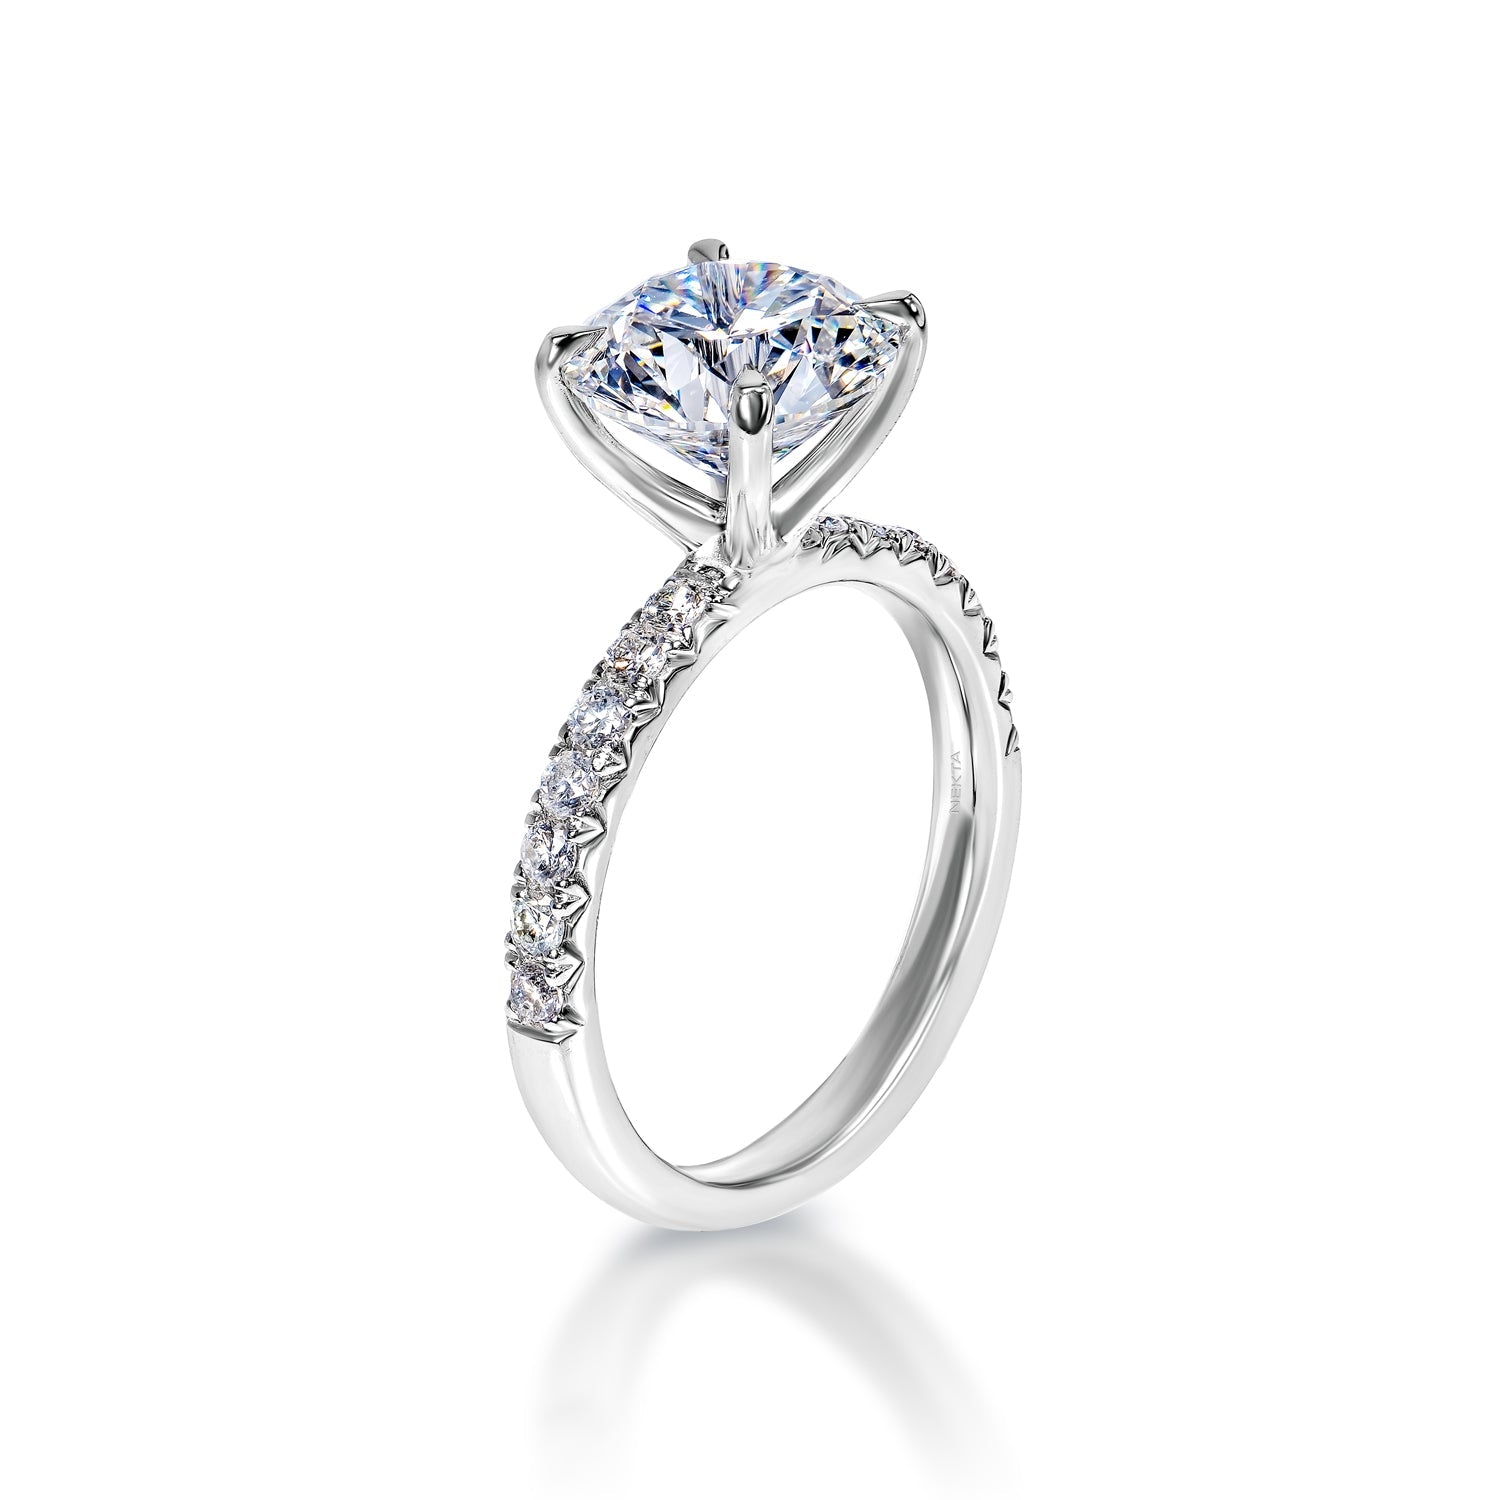 Lilly 3 Carat F VVS2 Round Brilliant Lab Grown Diamond Engagement Ring in 18k White Gold. IGI Certified Side View